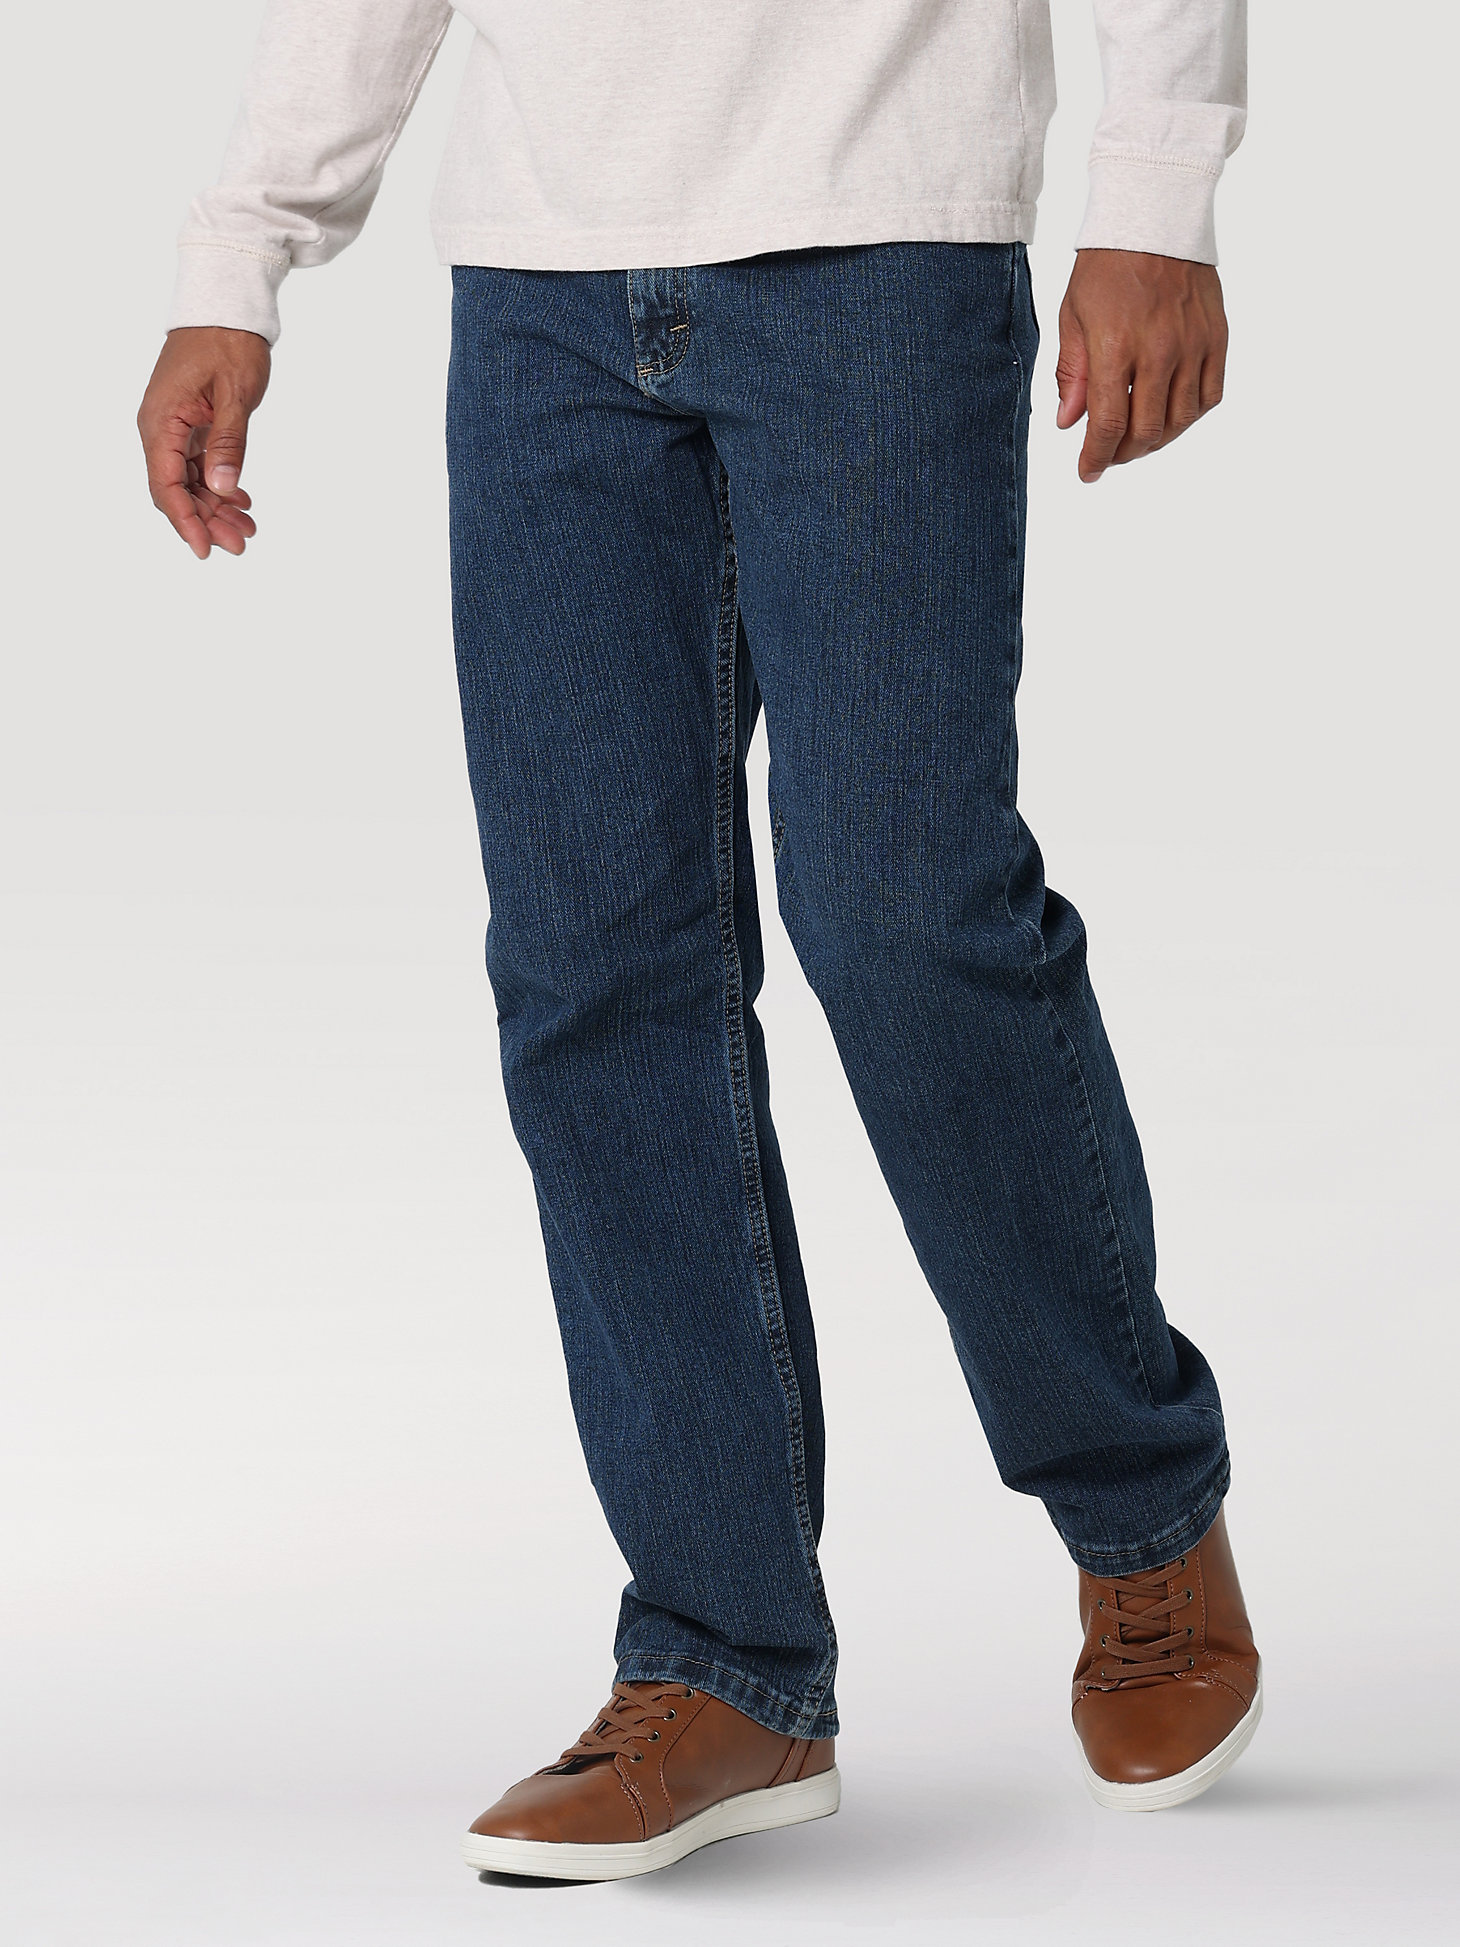 Men's Relaxed Fit Flex Jean in CS Wash main view